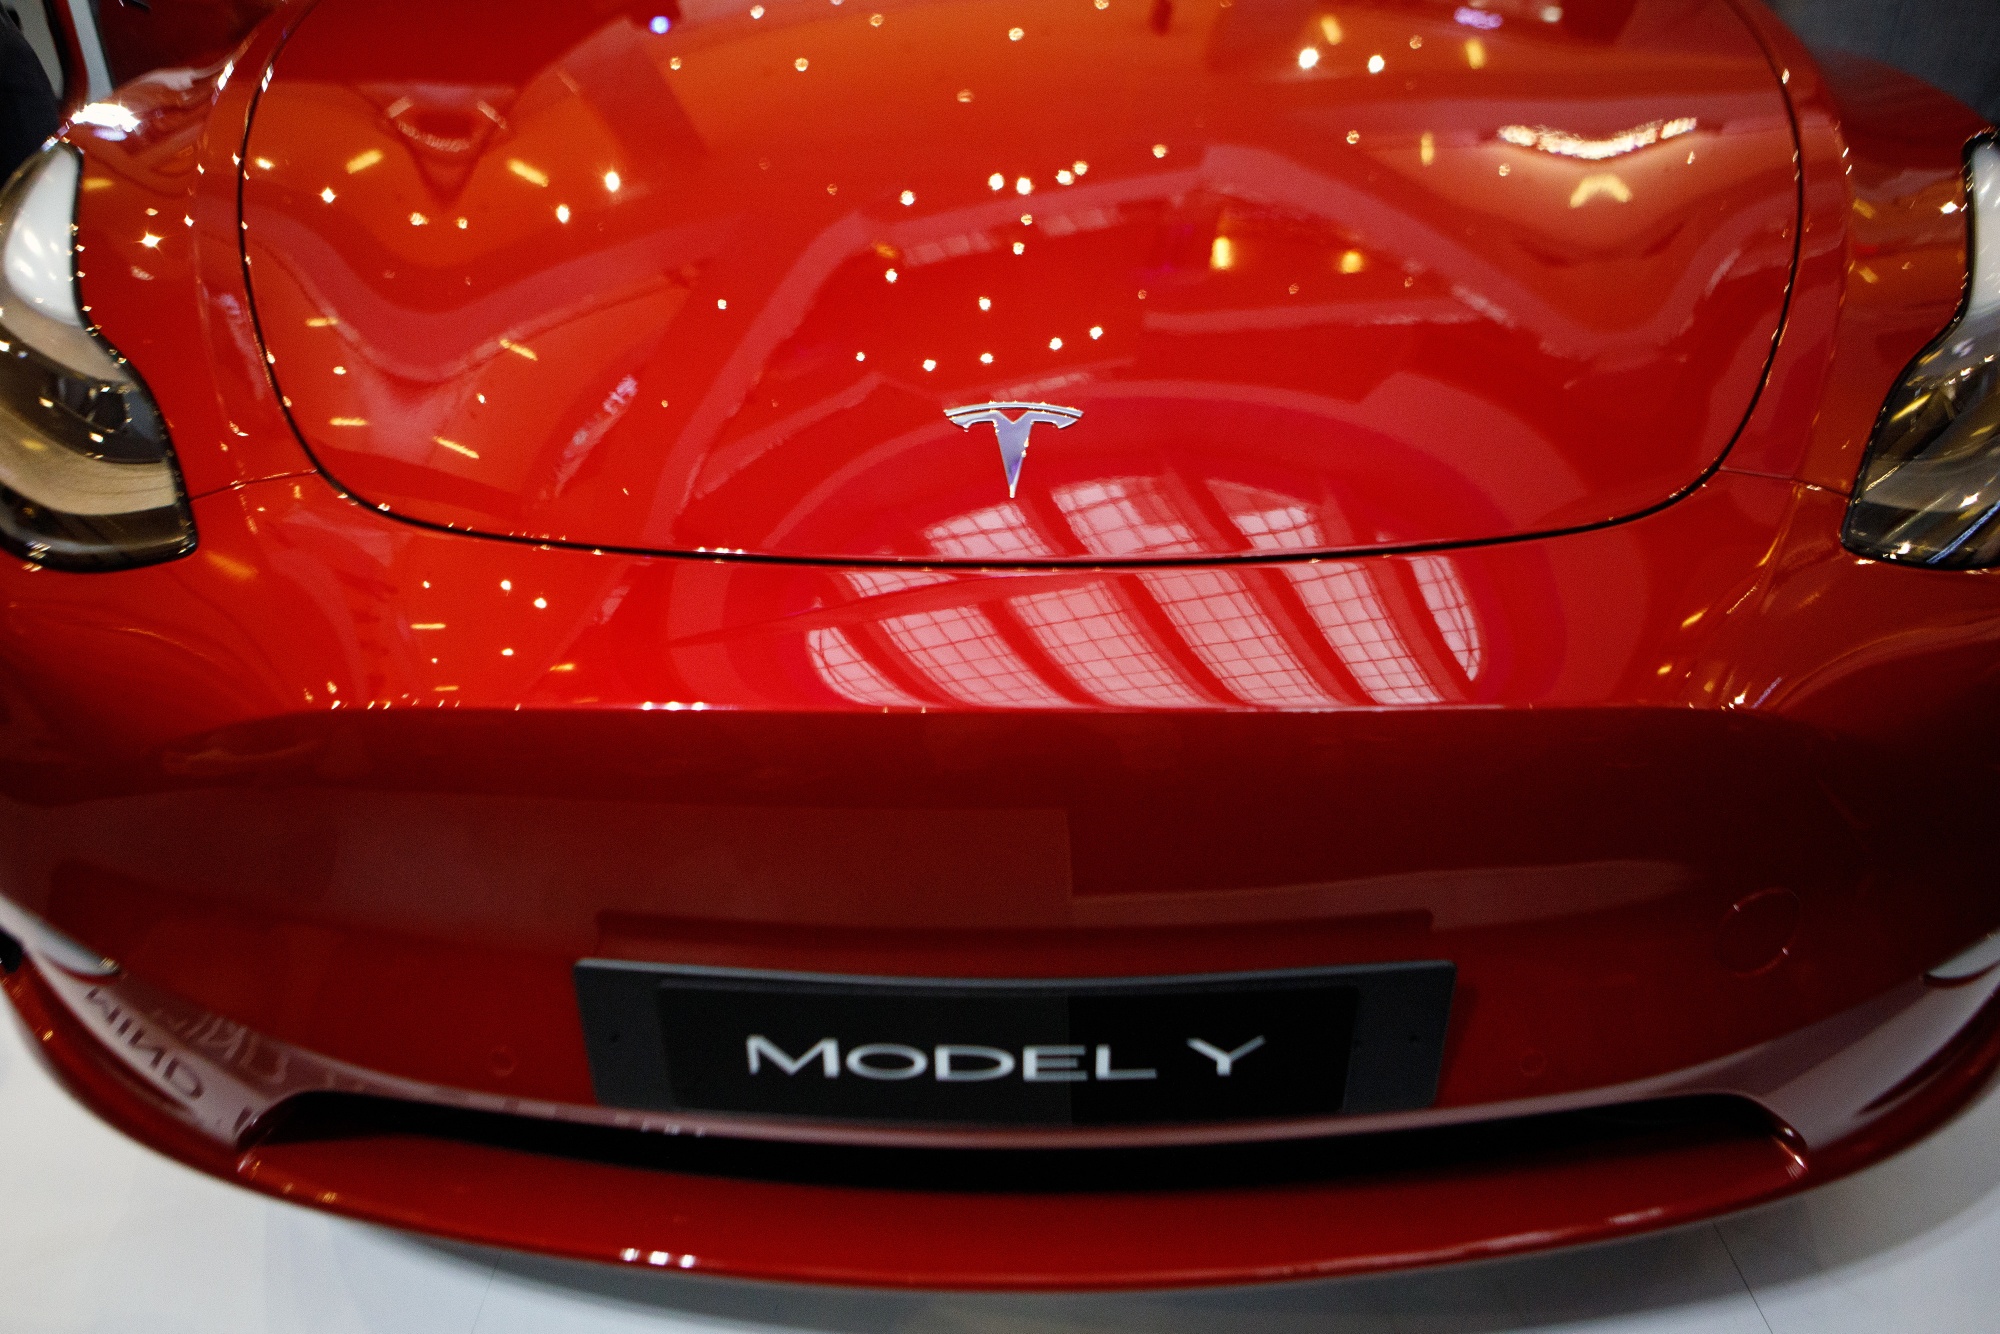 Tesla Raises Prices of Its Model Y SUV in the US - Bloomberg